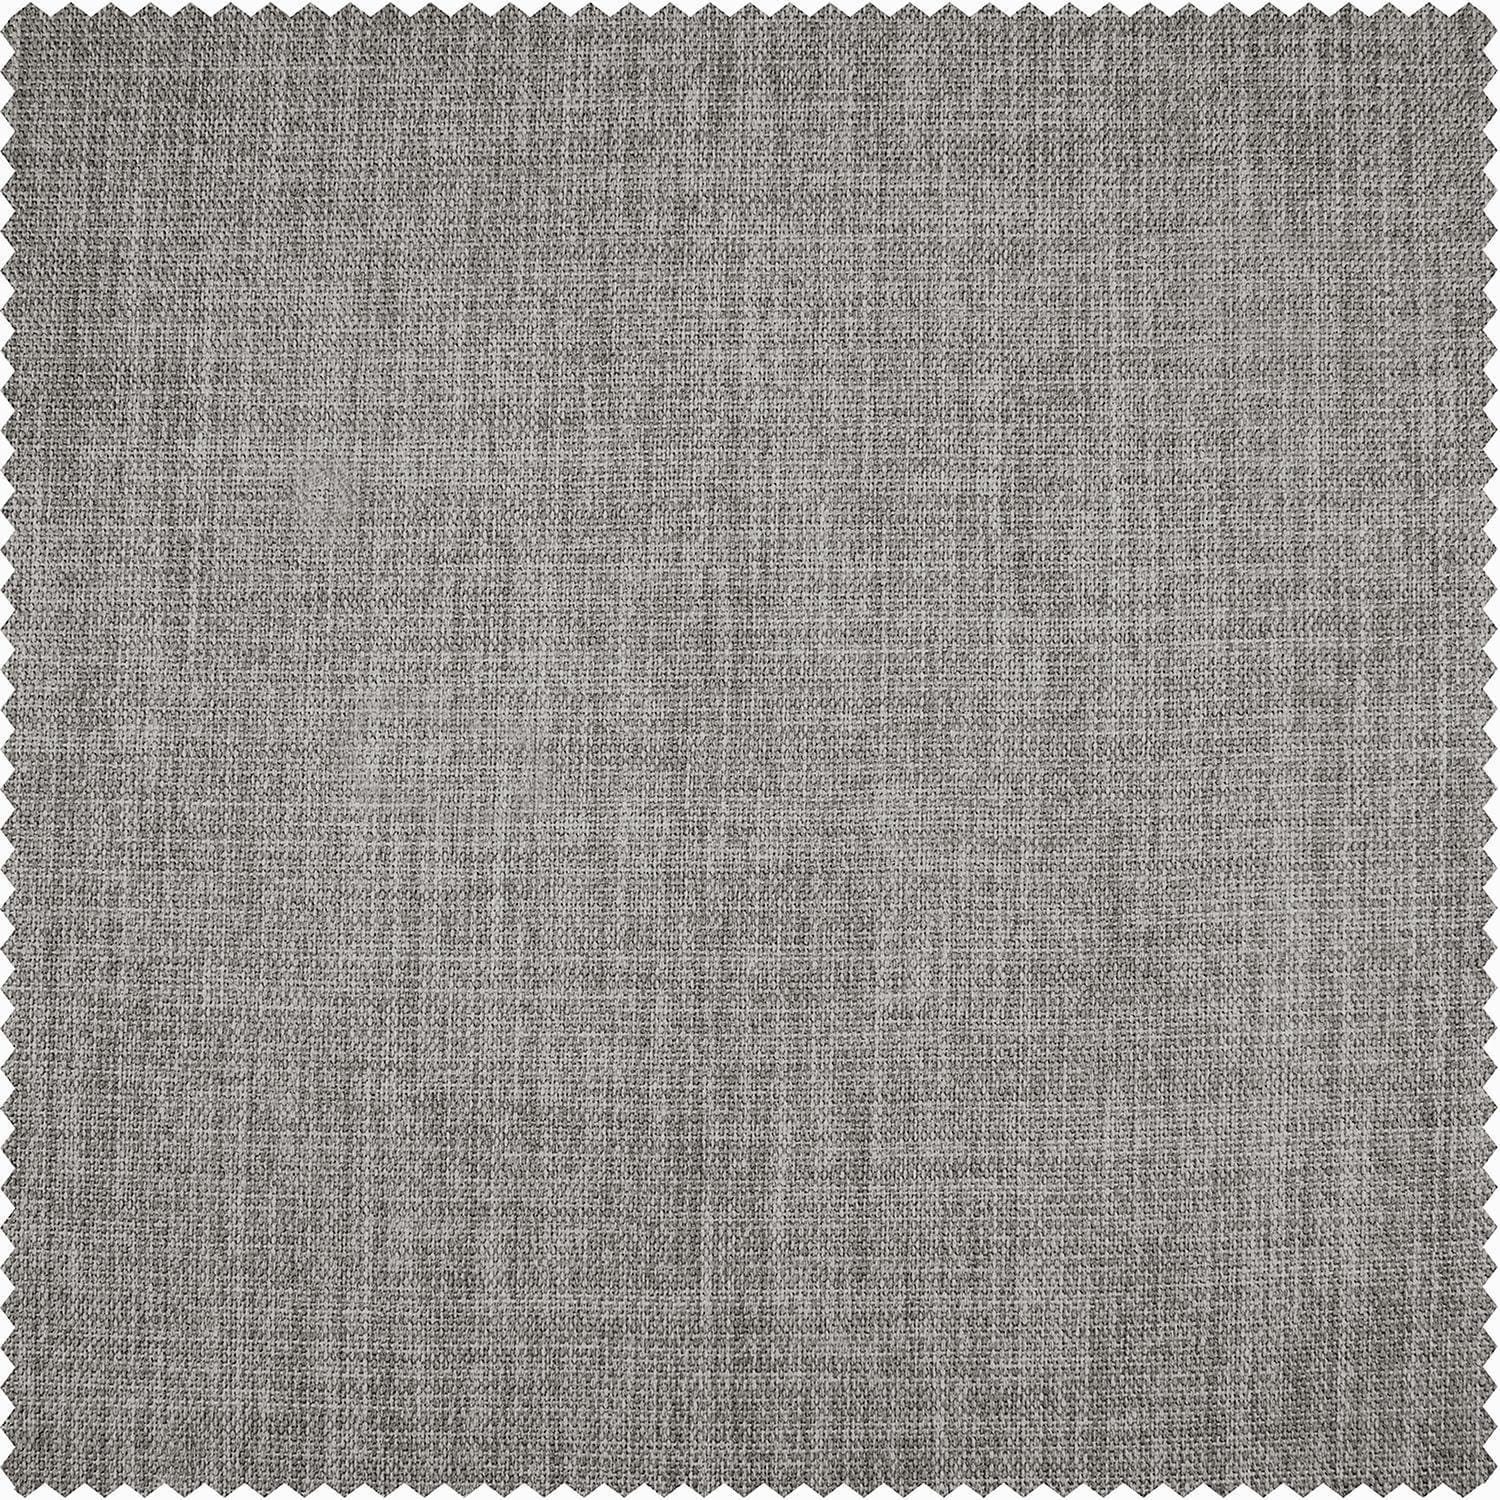 Clay Textured Faux Linen Swatch